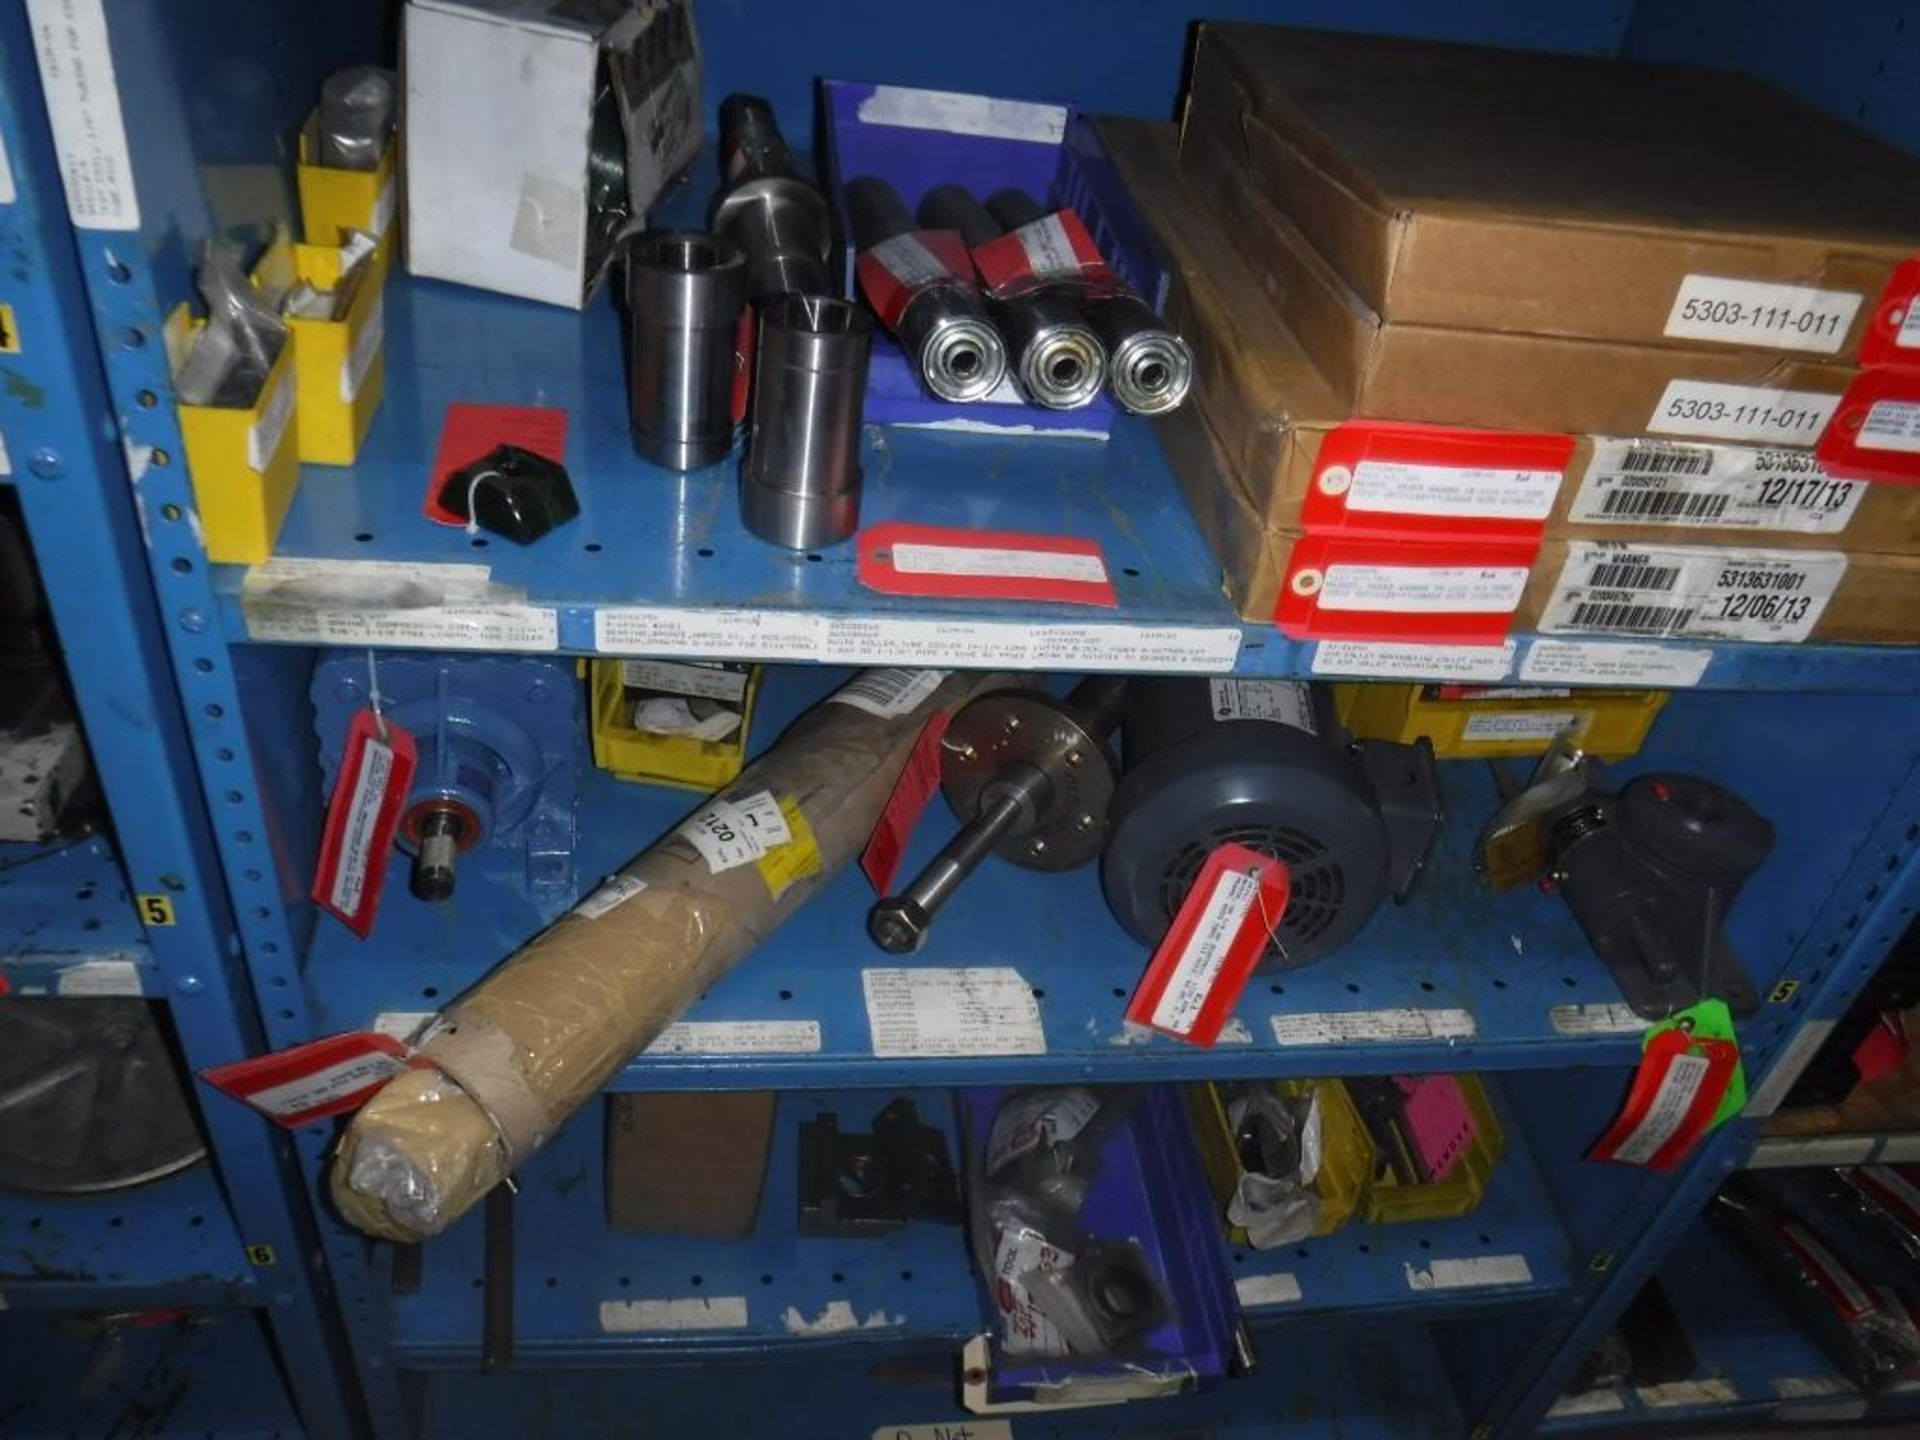 Contents of Shelving 155M Thru 164-5M-Pins,Valves,Shafts,Socket,Actuator,Idler Wheel,Wire Carrier,Ai - Image 23 of 33